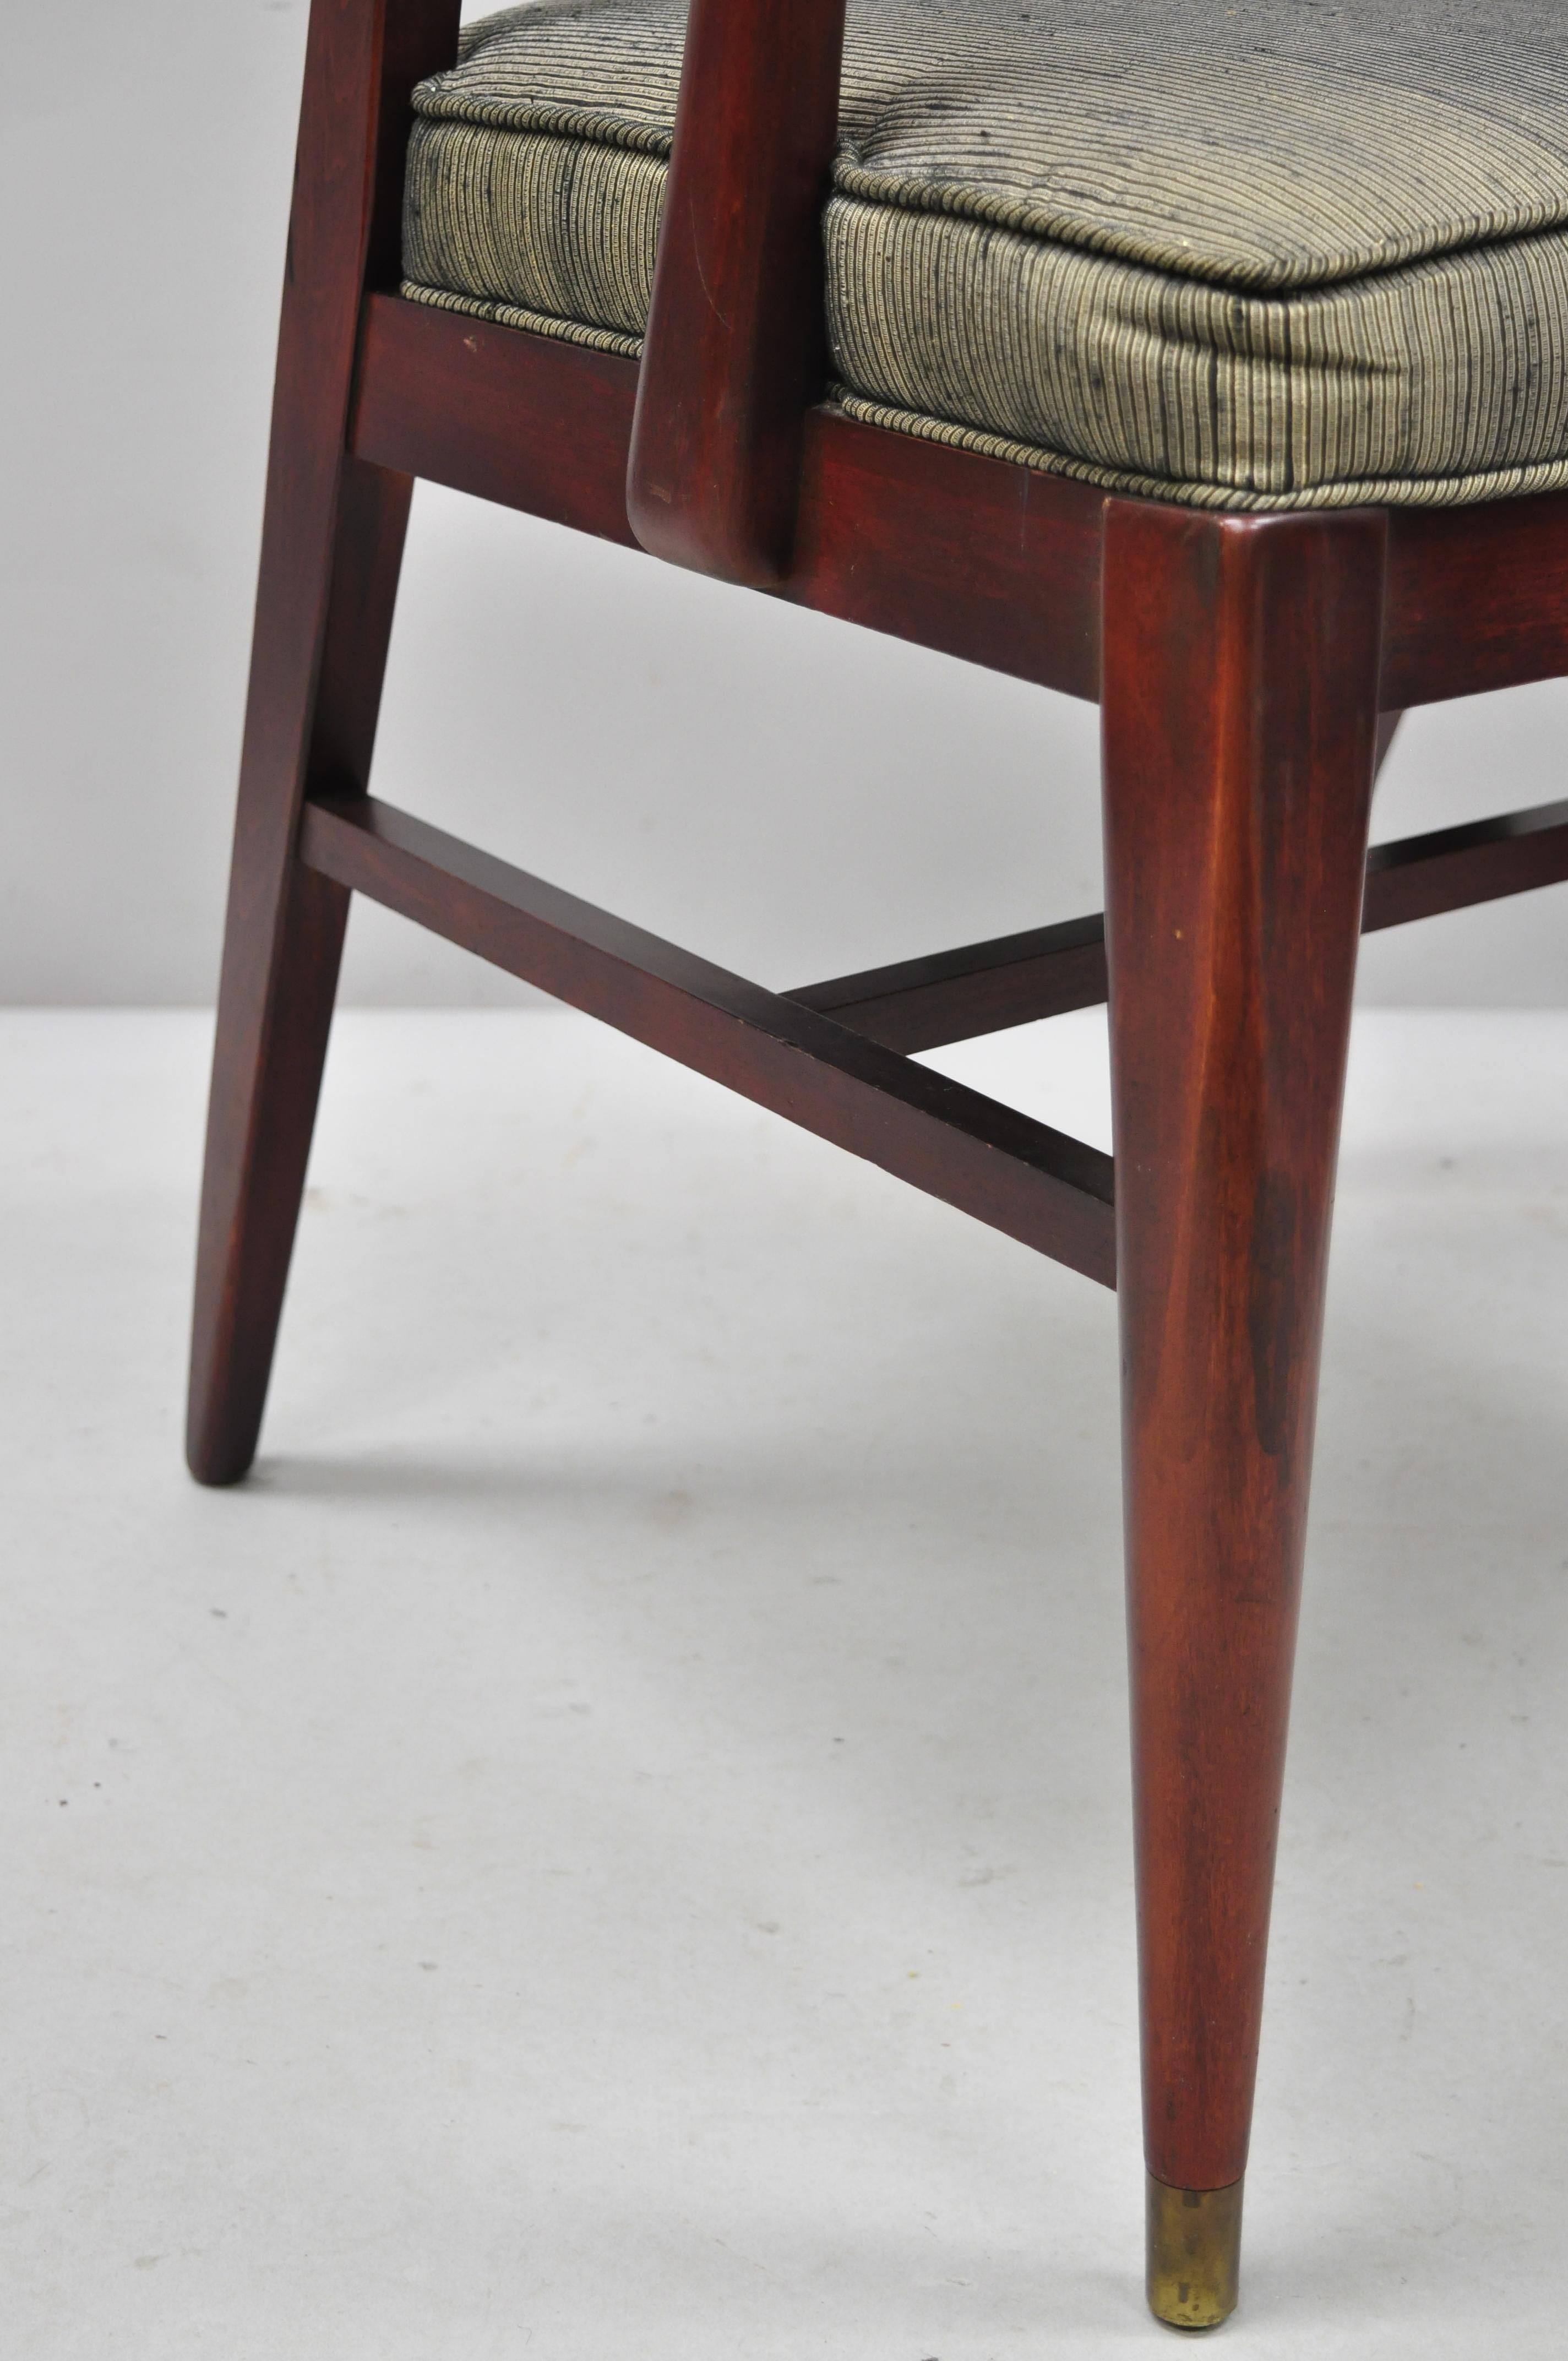 American Vintage Mid-Century Modern Horseshoe Curved Back Mahogany Dining Chair A